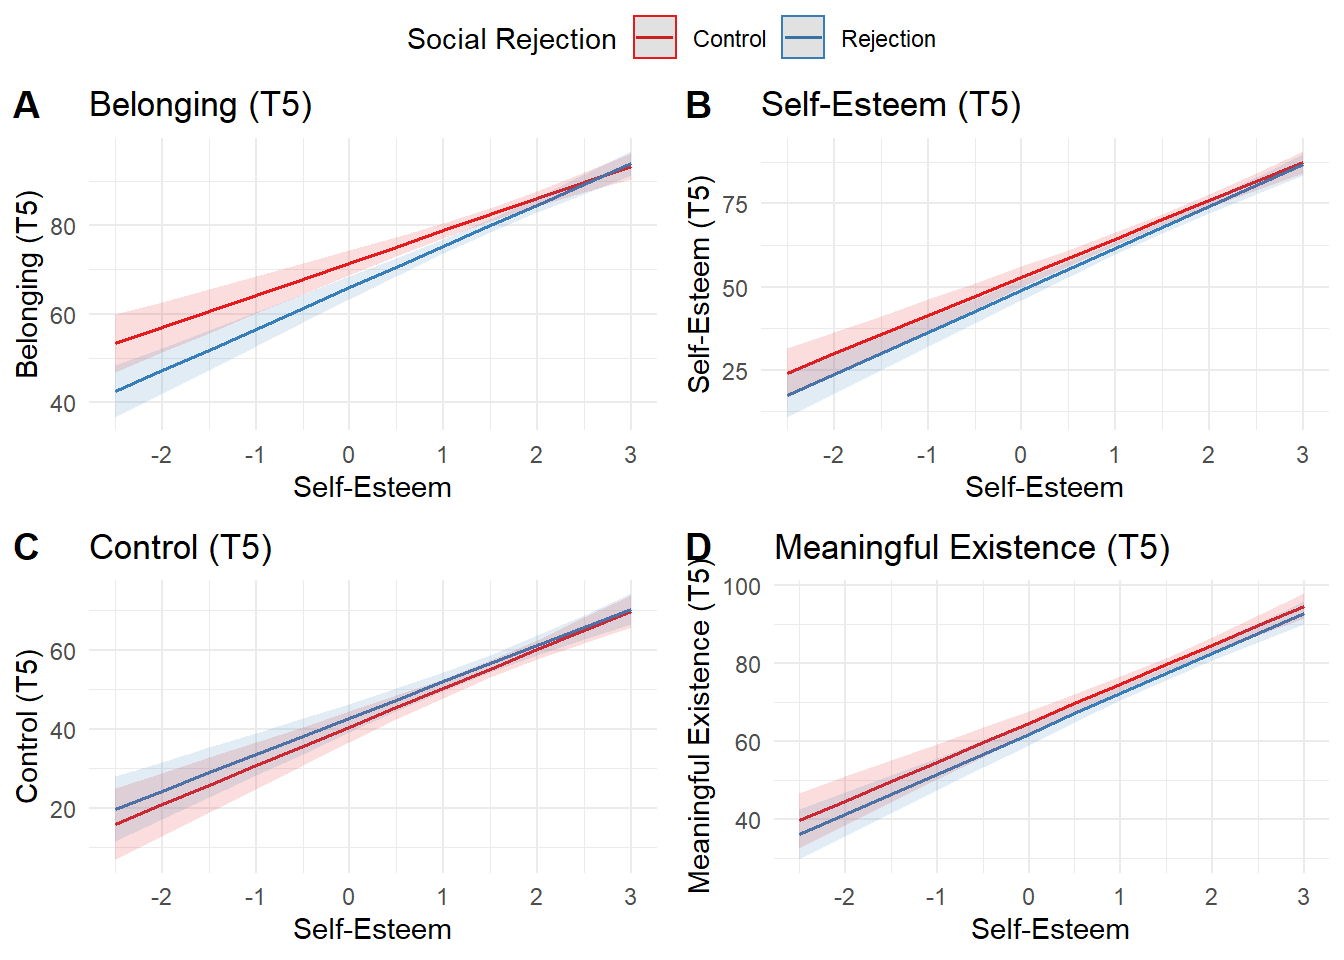 Study 1e - Self-Esteem as a Possible Moderator for the Effect of Rejection on Need-Threat